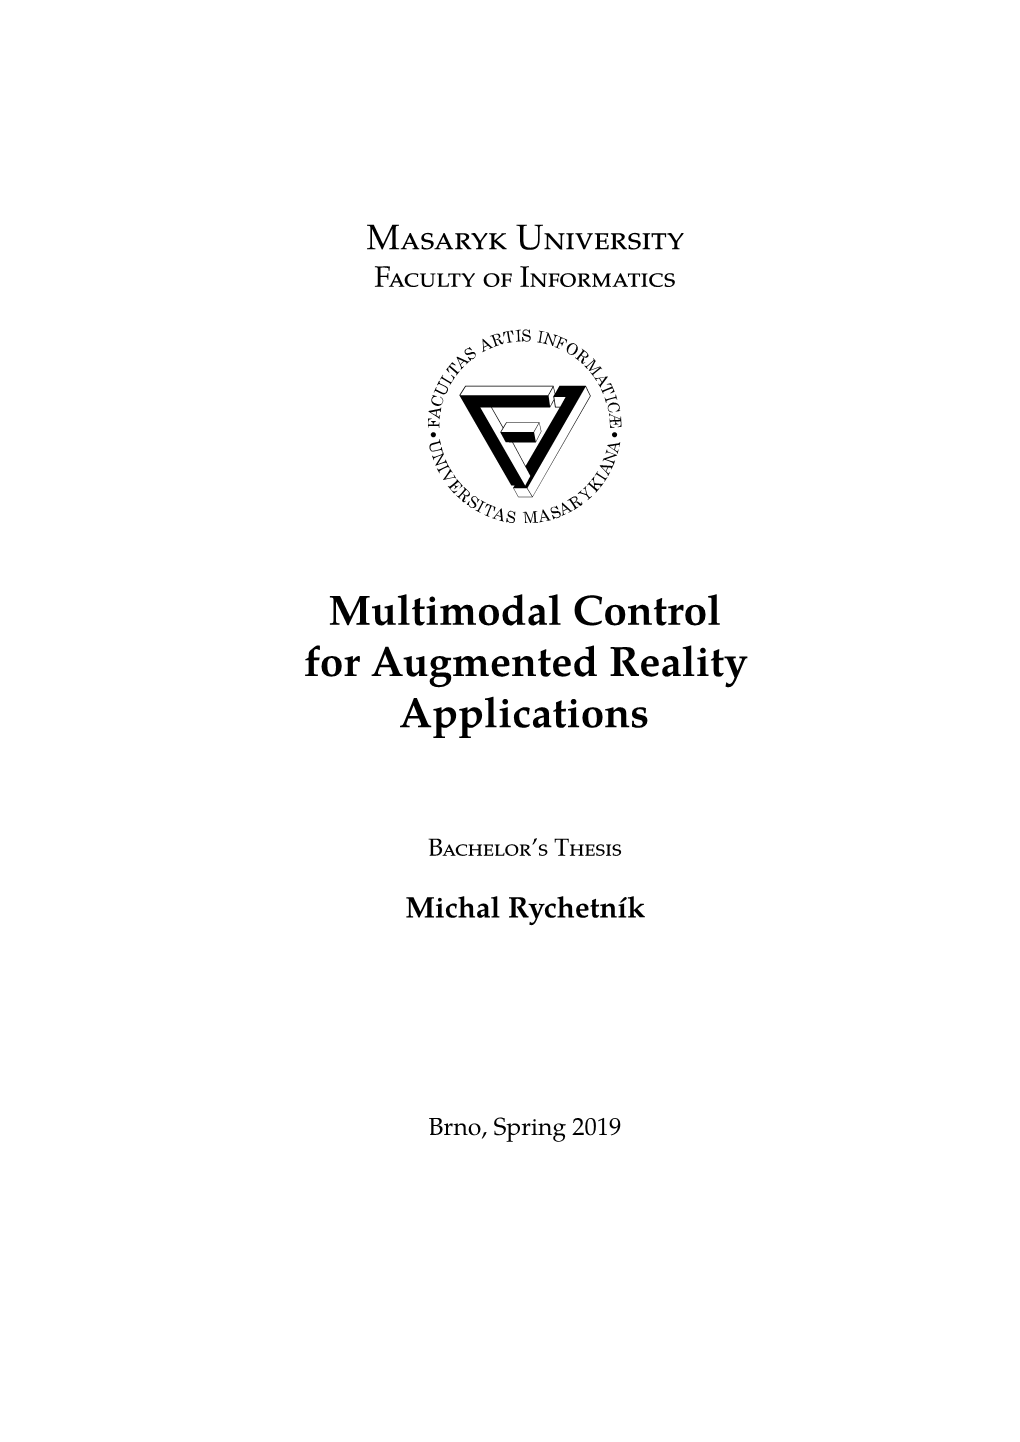 Multimodal Control for Augmented Reality Applications